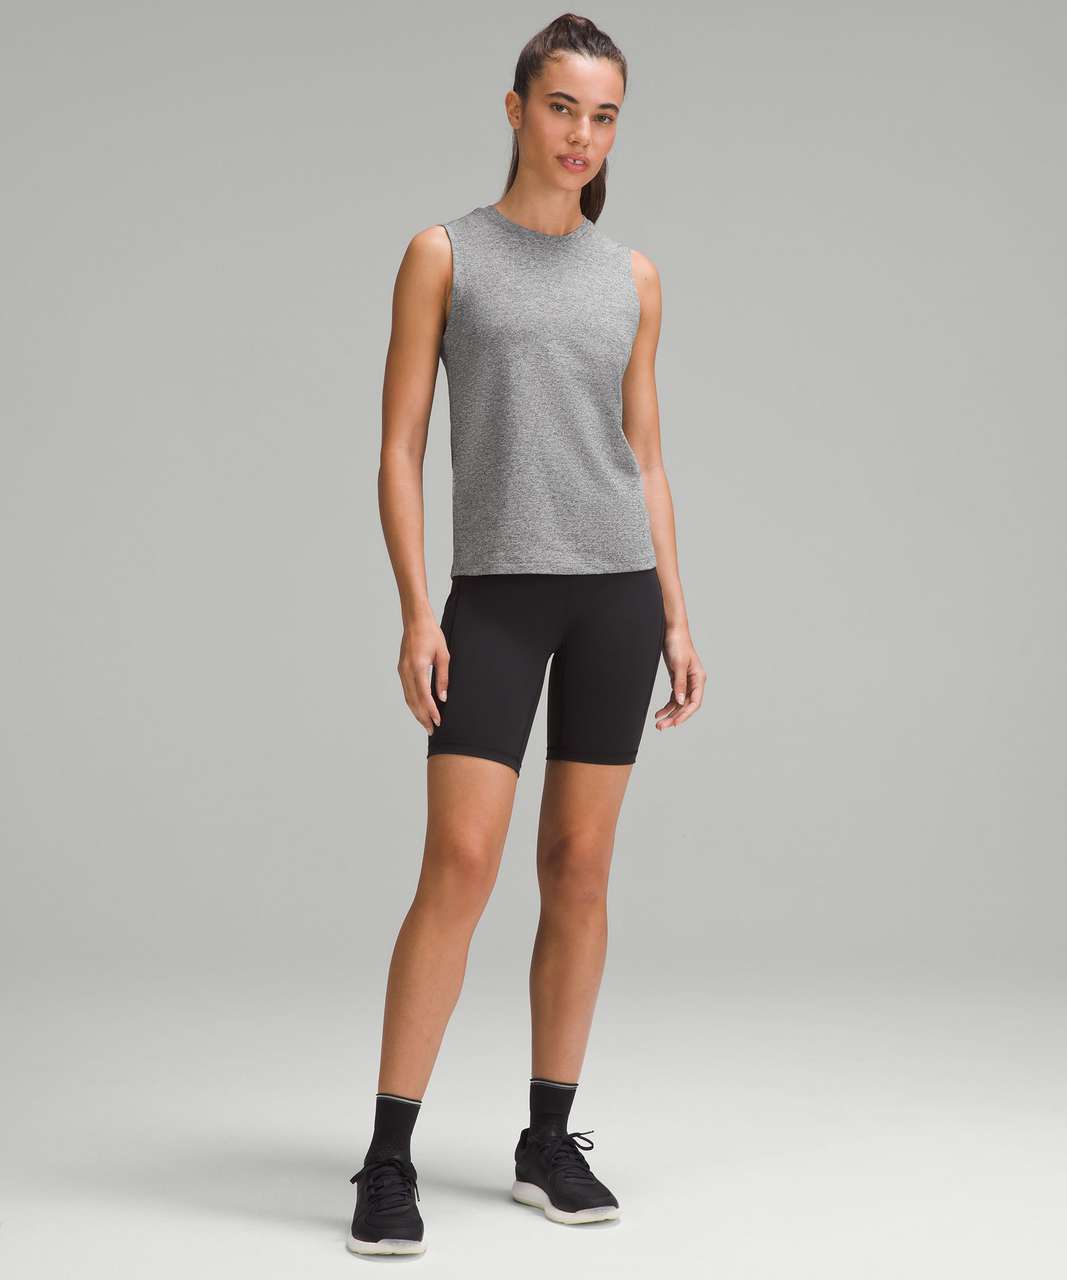 Lululemon License to Train Classic-Fit Tank Top - Heathered Black